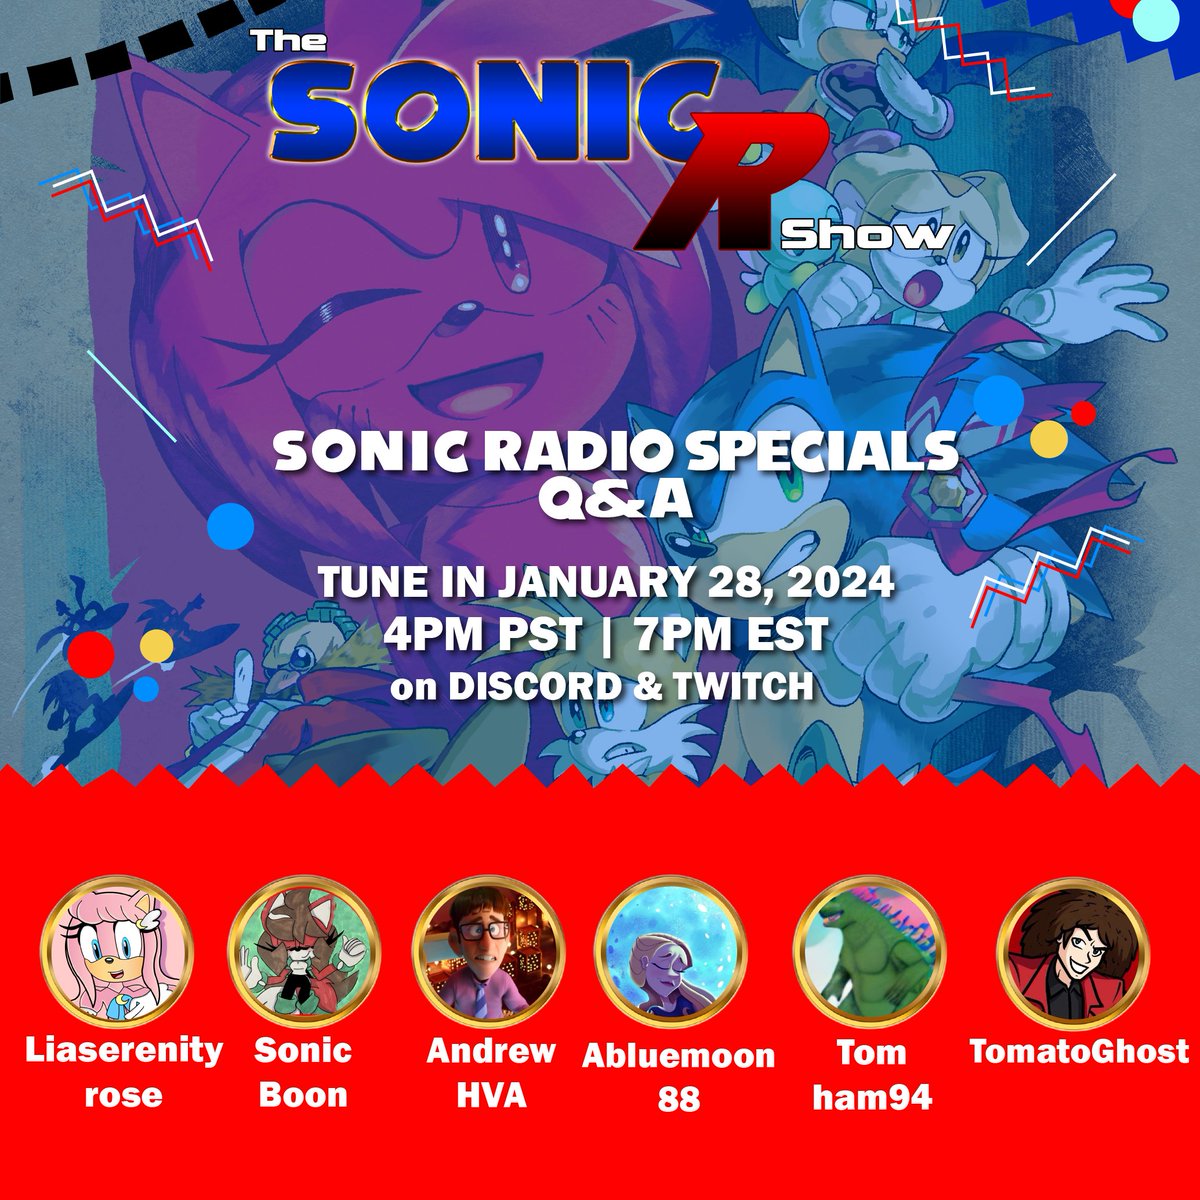 Next Sunday on January 28, 2024, at 4 PM PT/7 PM ET join Sonic Boon & I, as we will be doing a q&a with @HvaAndrew, @abluemoon88, Tomham94 & @TomatoGhost about the Sonic Radio Specials in the @SonicRevolt Discord Server!